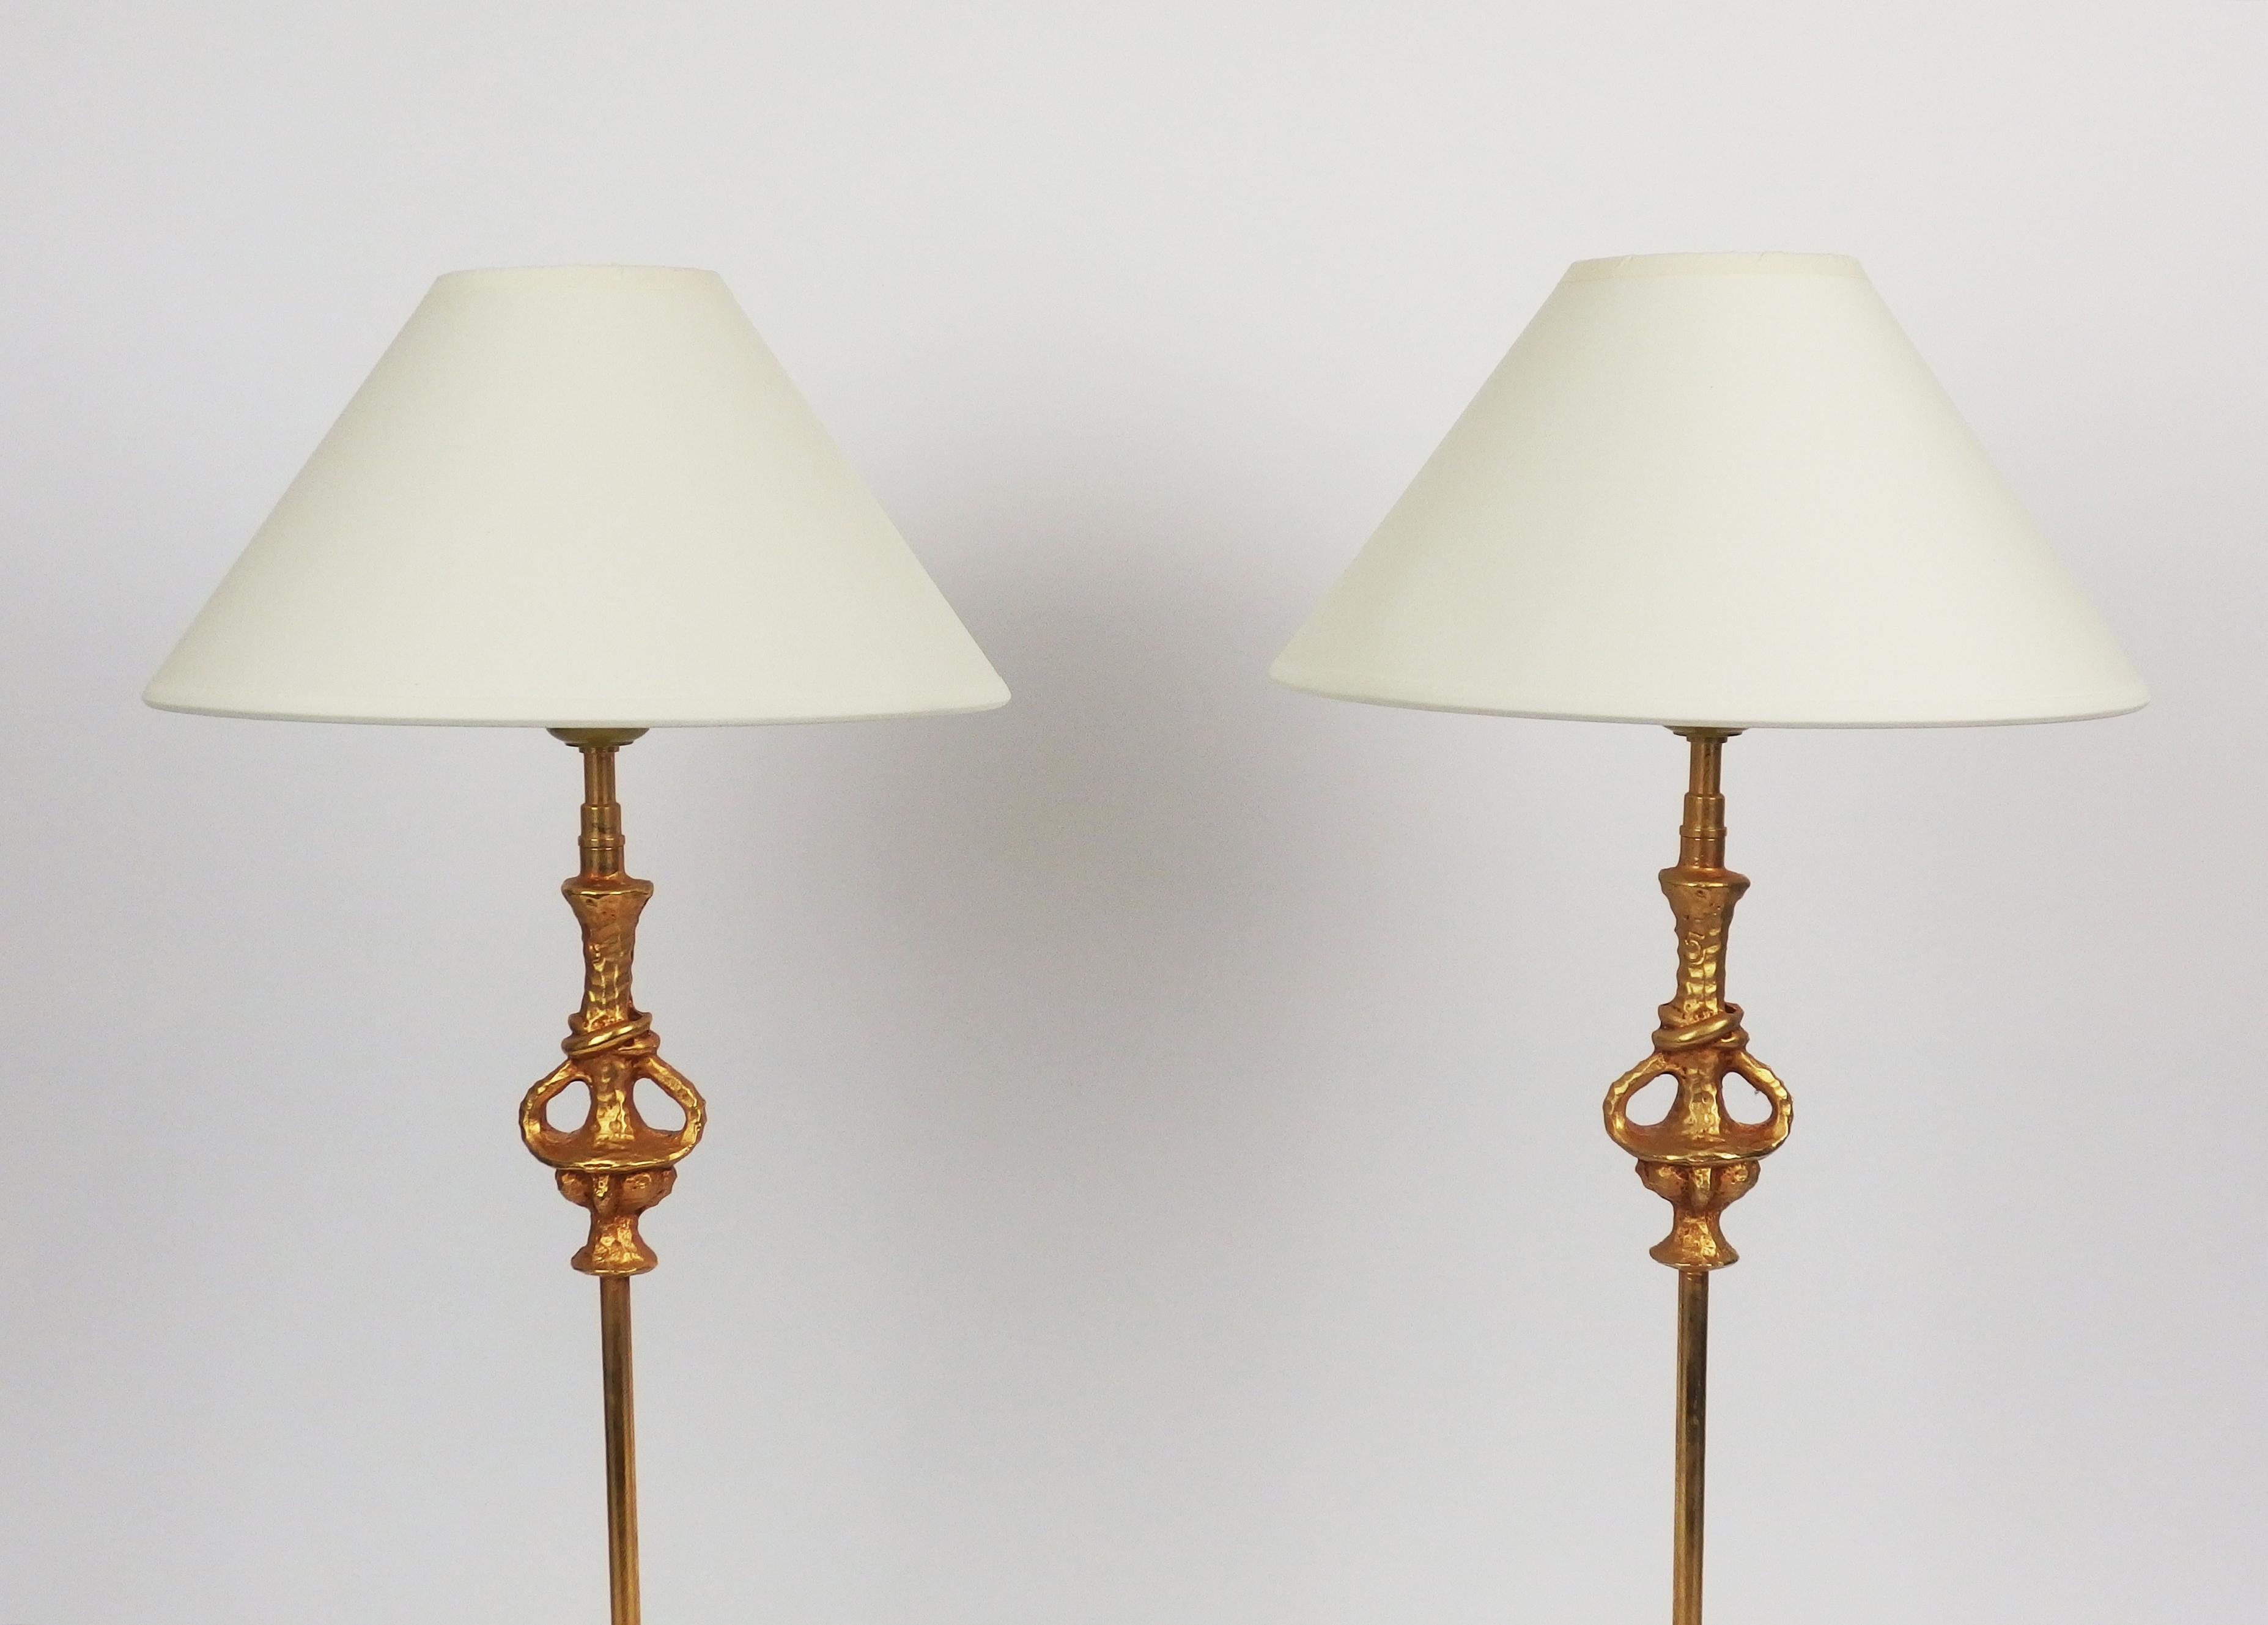 Two elegant gilt metal table lamps designed by Nicolas de Wael and edited by Fondica. Signed.
Dimensions without the shades:
Base:4.13inX4.13in
Height:20.66in
Nicolasde Wael designs lamps & table ware for several manufactures (among them: